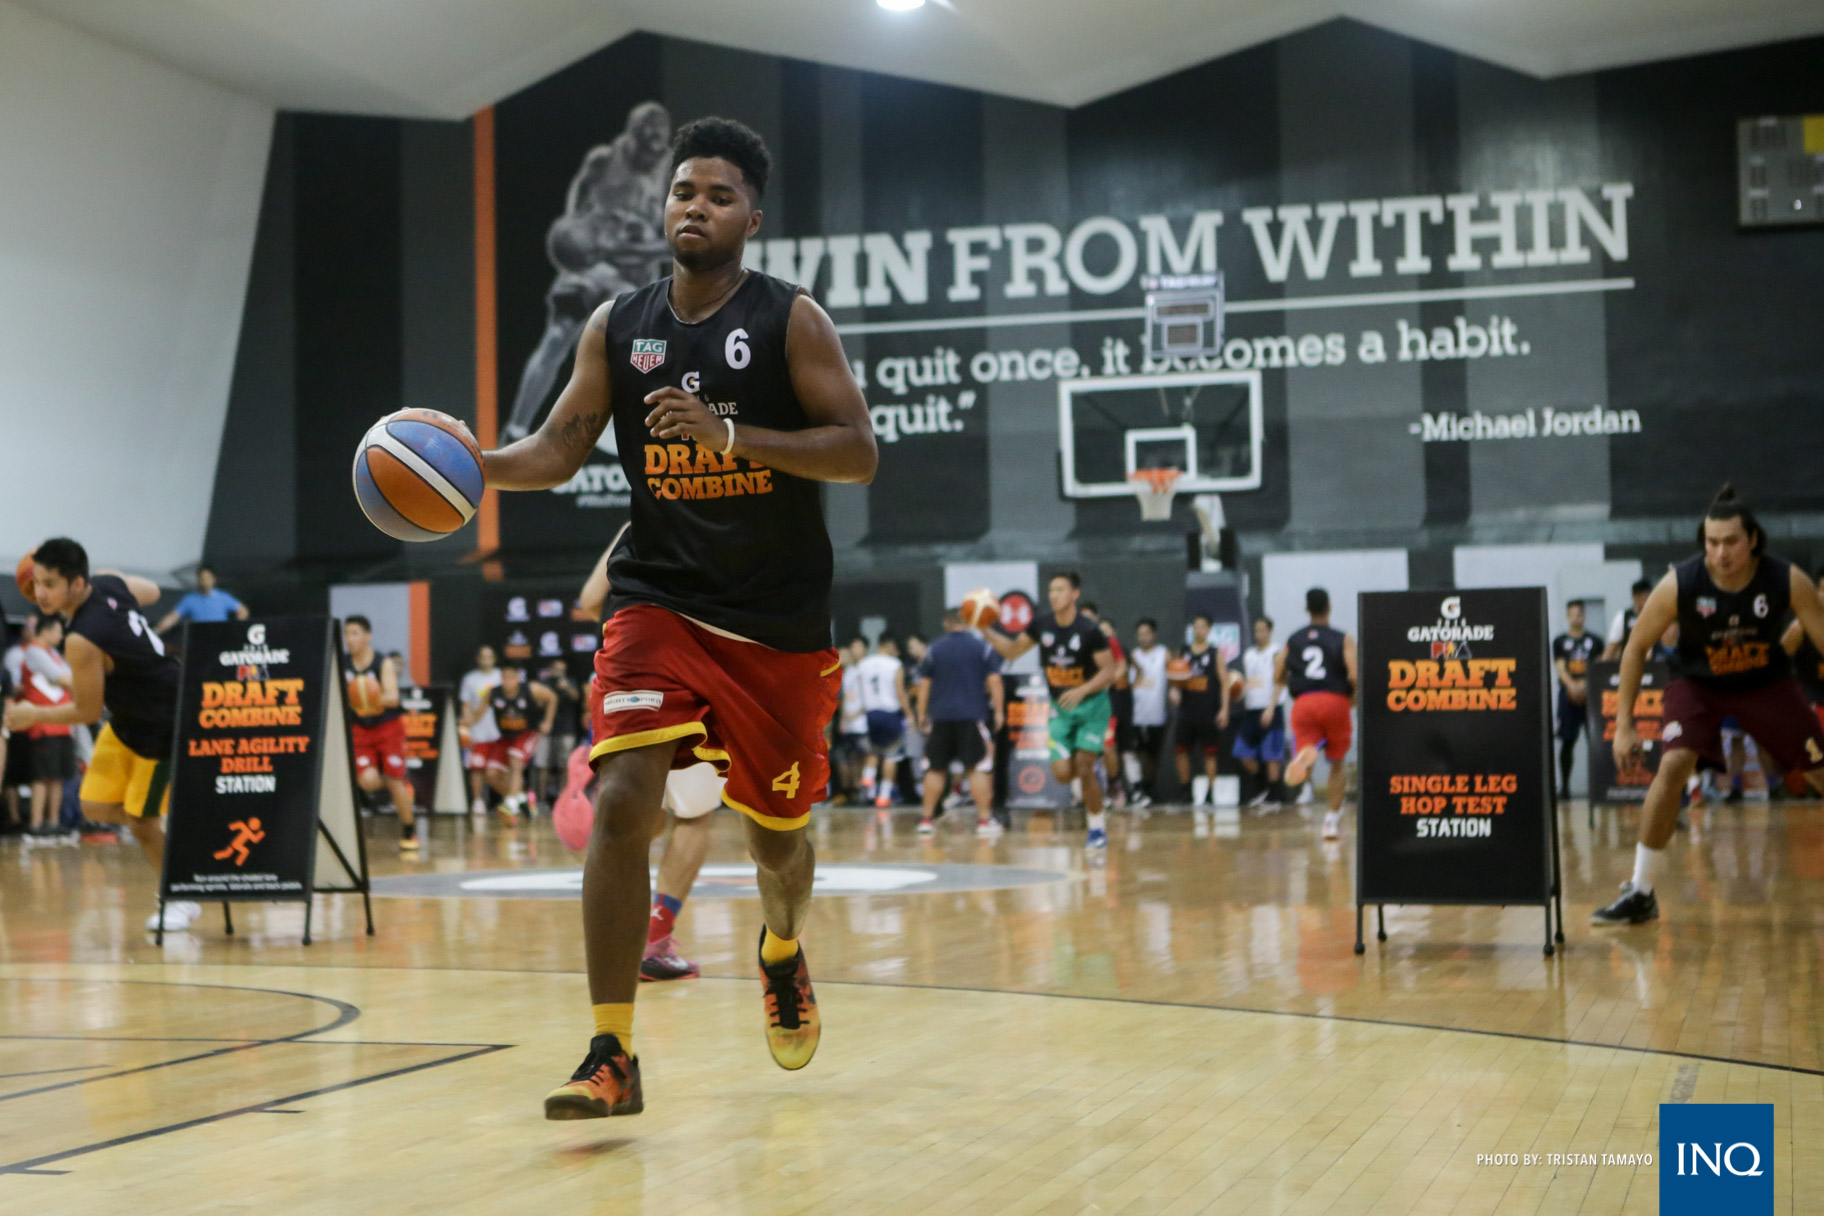 Joseph Eirobu goes through a drill at the 2016 PBA Rookie Draft Combine. Photo by Tristan Tamayo/INQUIRER.net